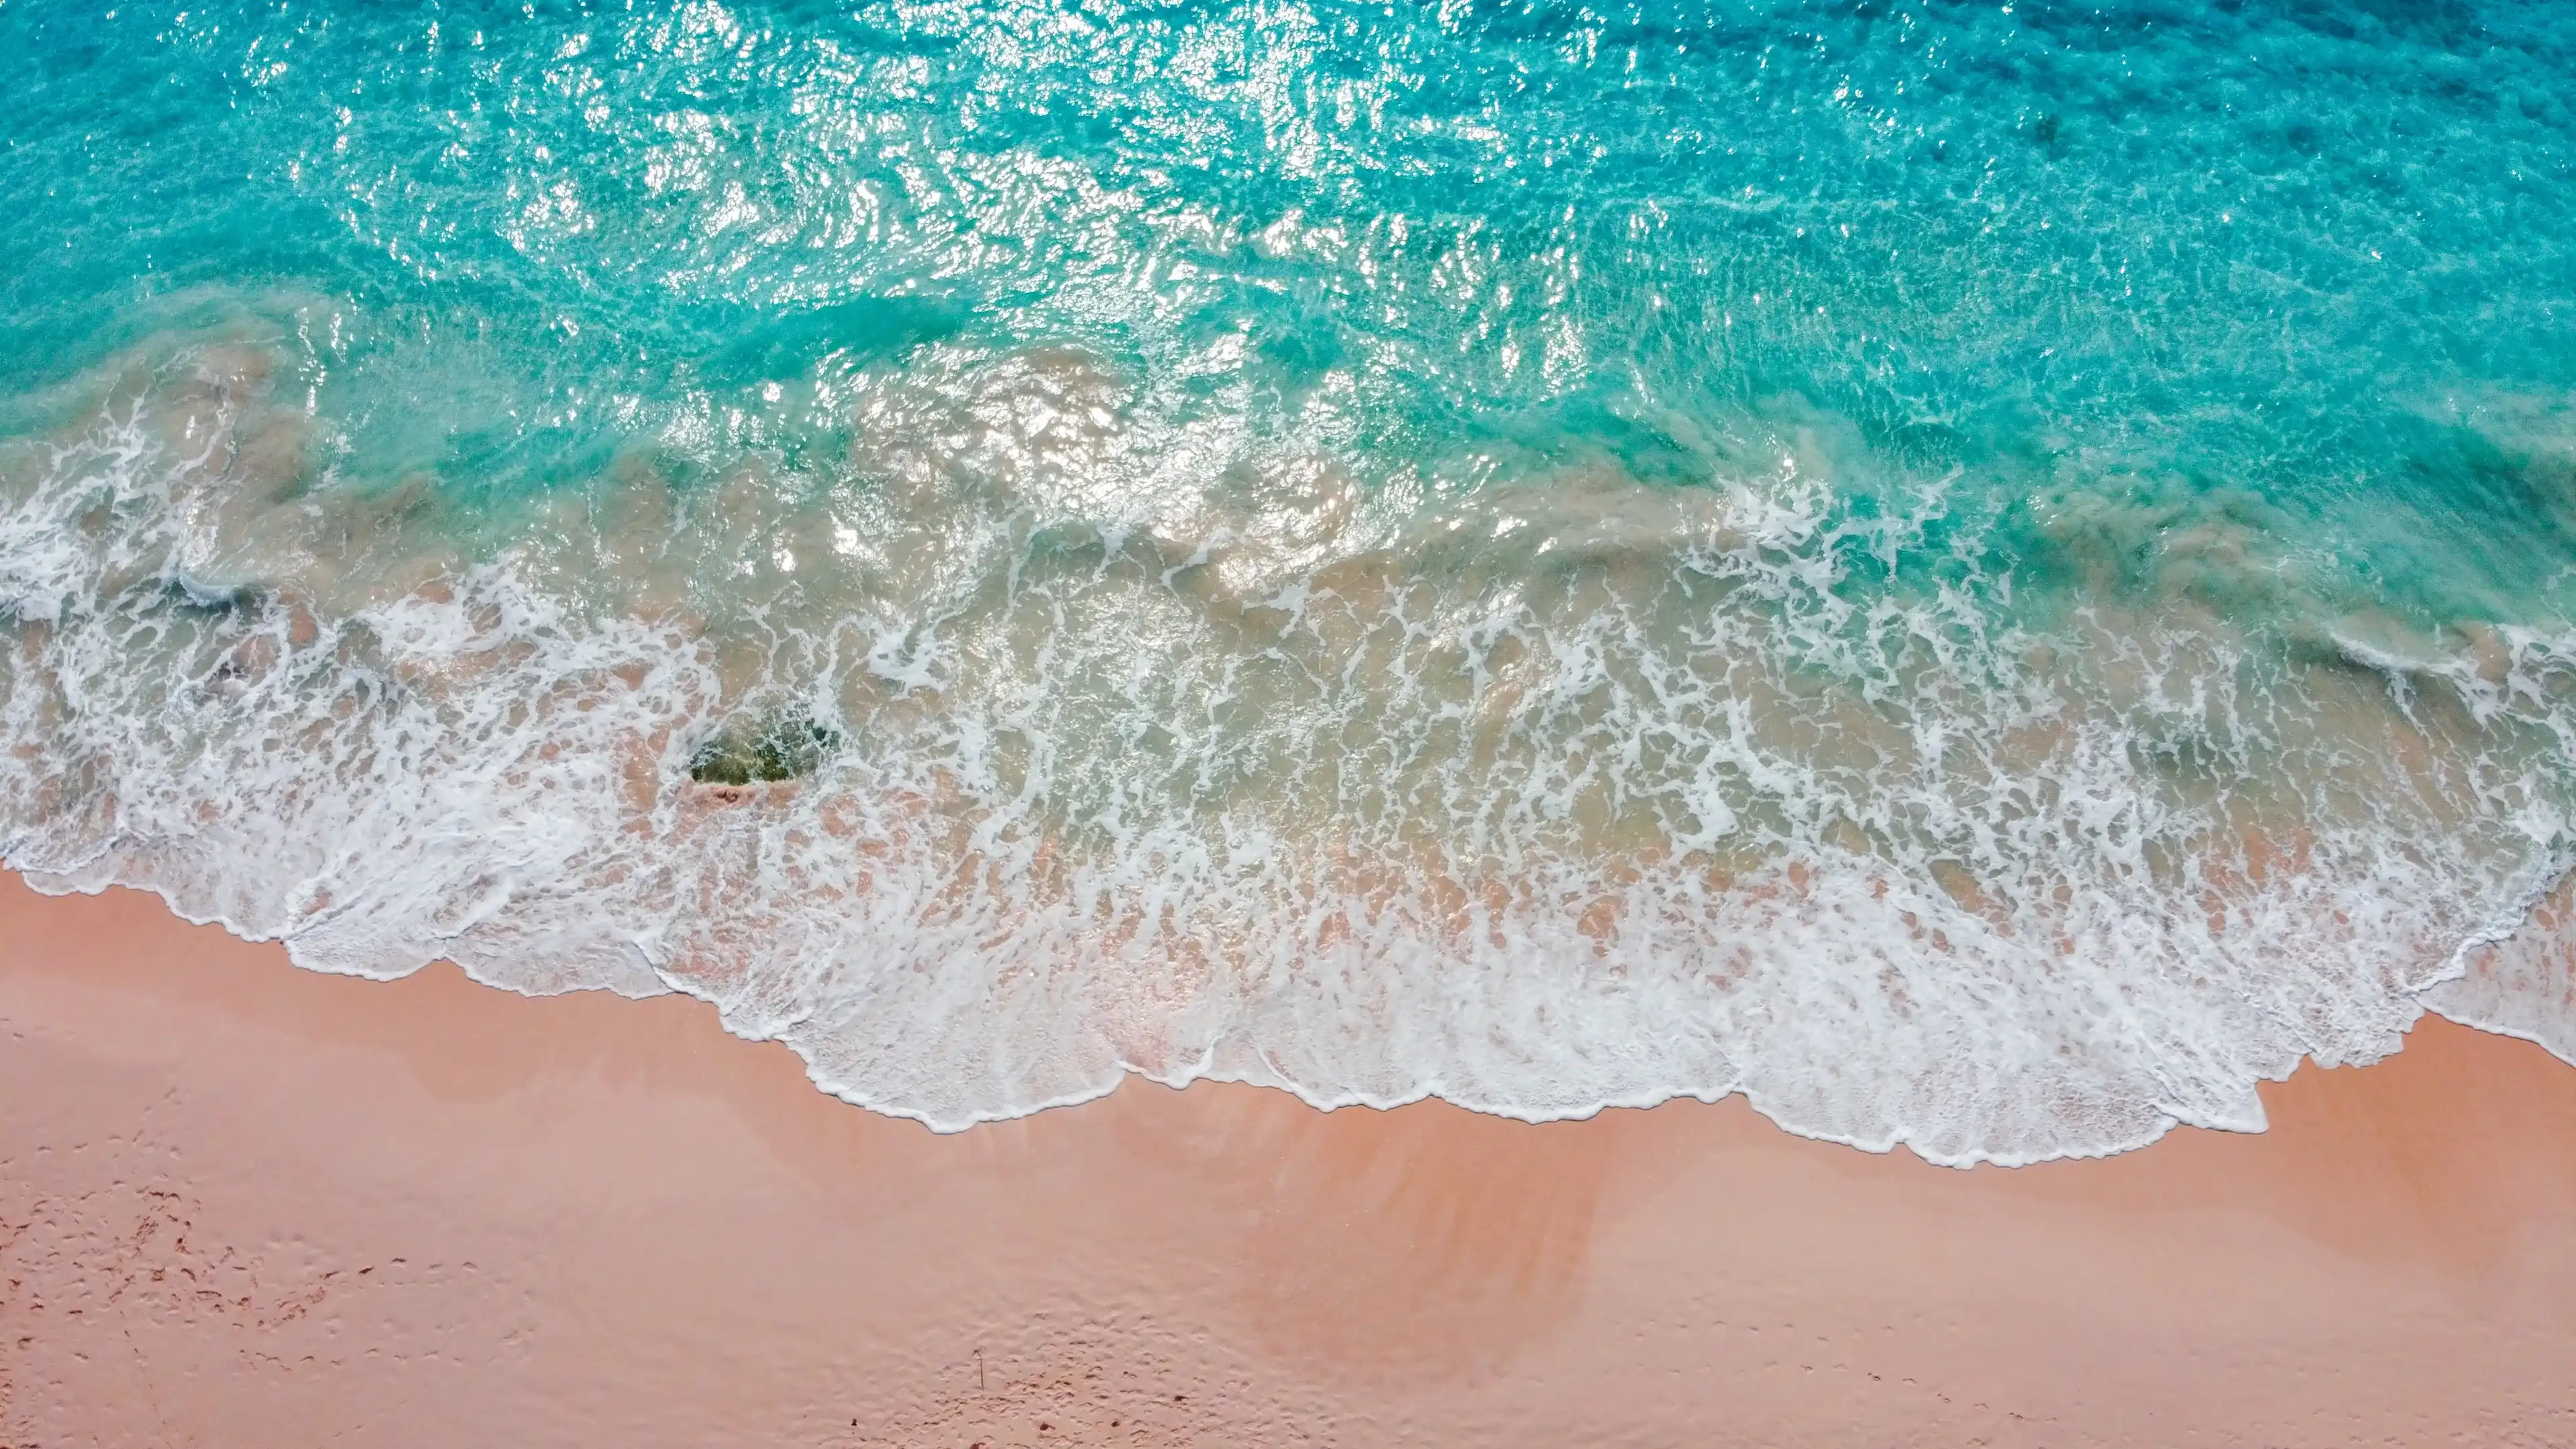 A scenic view with pink sands beach and blue ocean waves of Bermuda